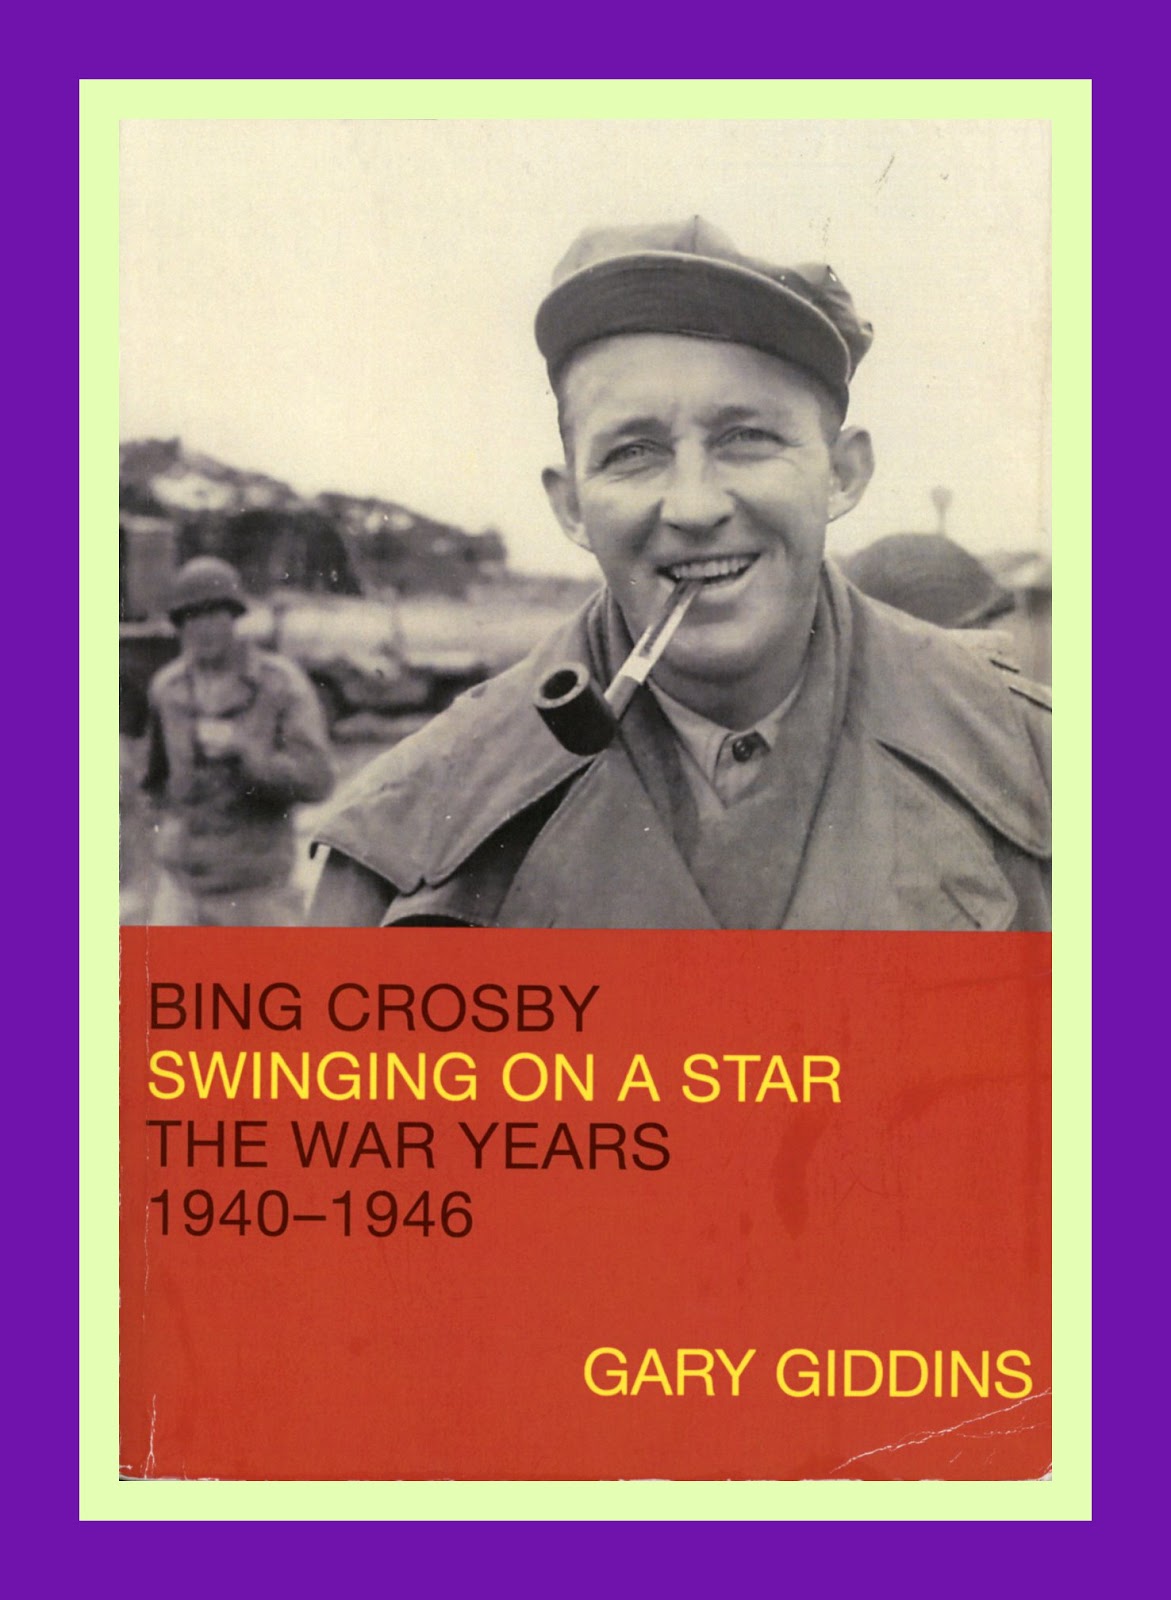 JazzProfiles Bing Crosby Swinging On A Star The War Years 1940-46 by Gary Giddins A Synopsis